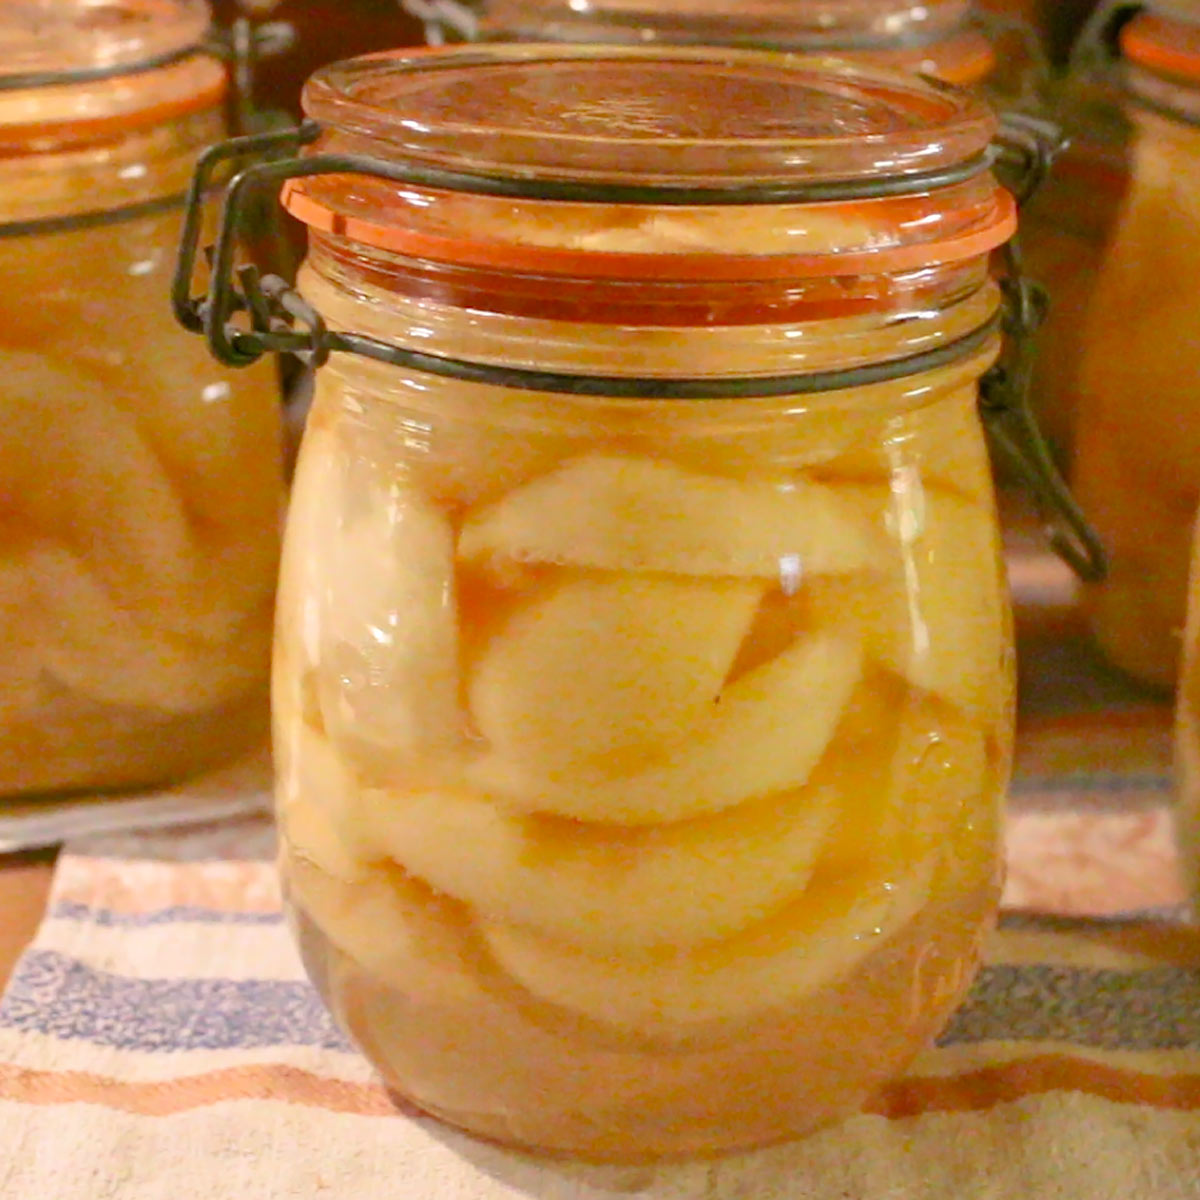 home canned pears right after the water bath canning process